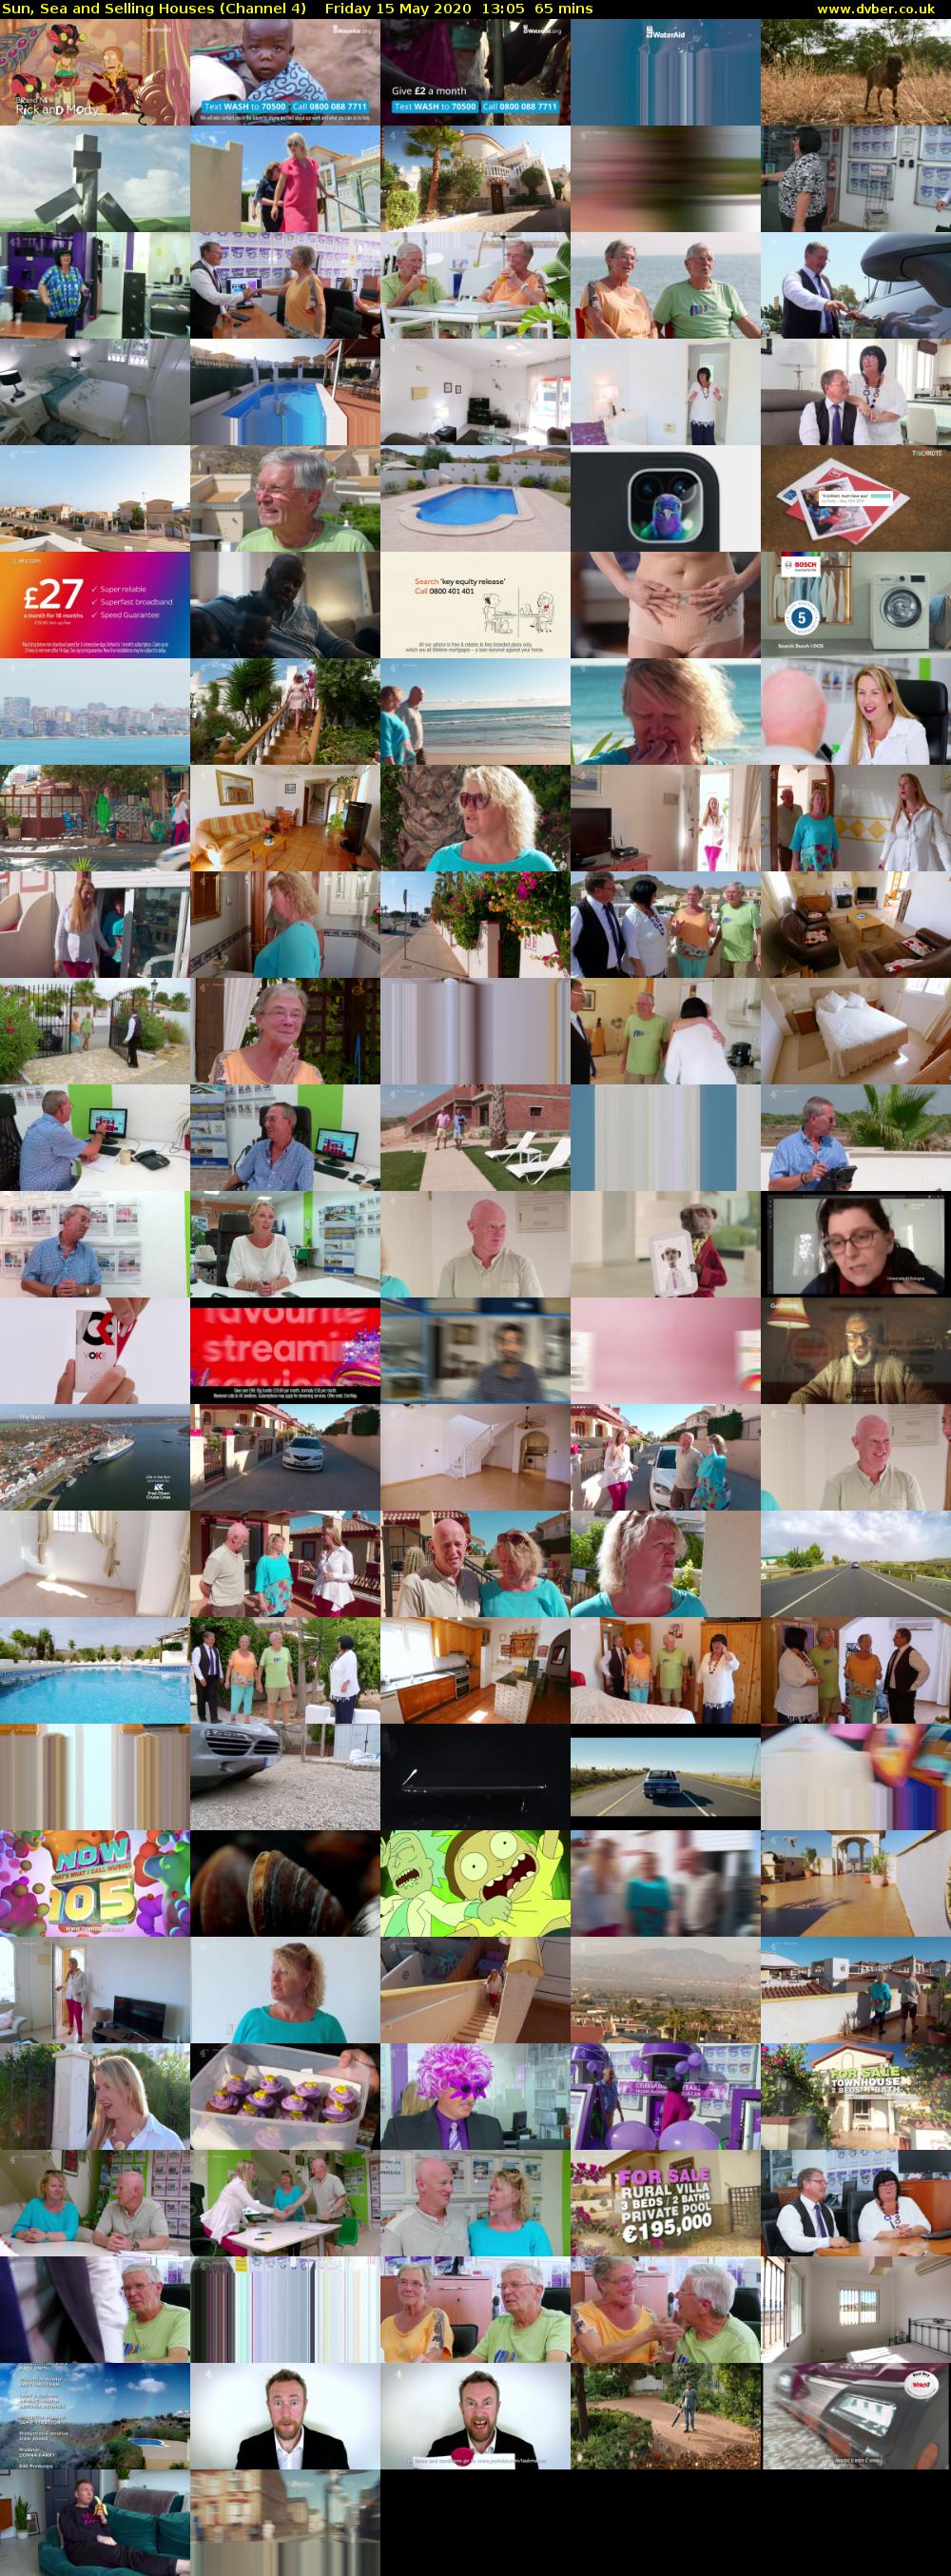 Sun, Sea and Selling Houses (Channel 4) Friday 15 May 2020 13:05 - 14:10